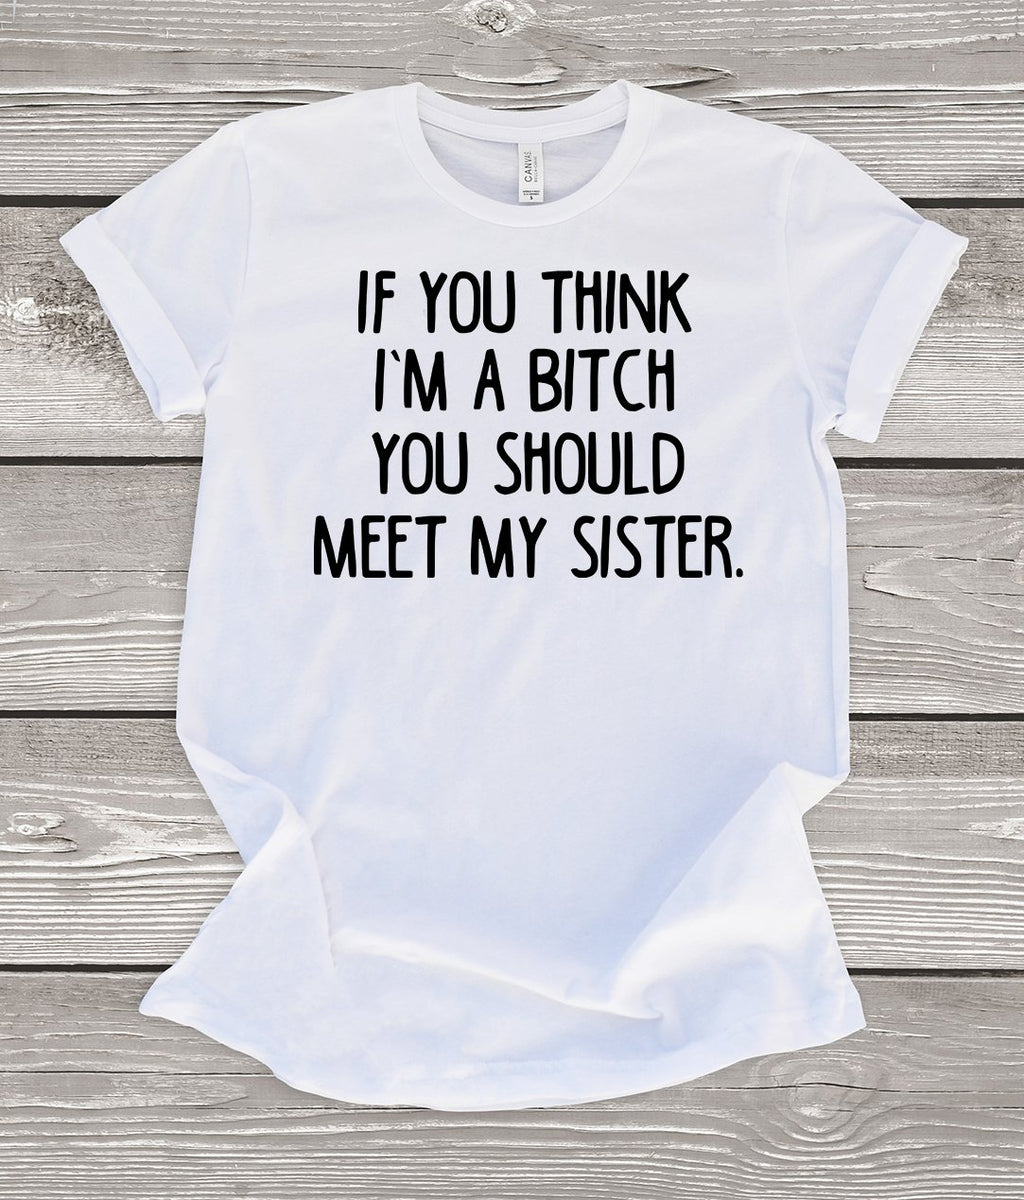 If You Think I'm a Bitch You Should Meet My Sister T-Shirt